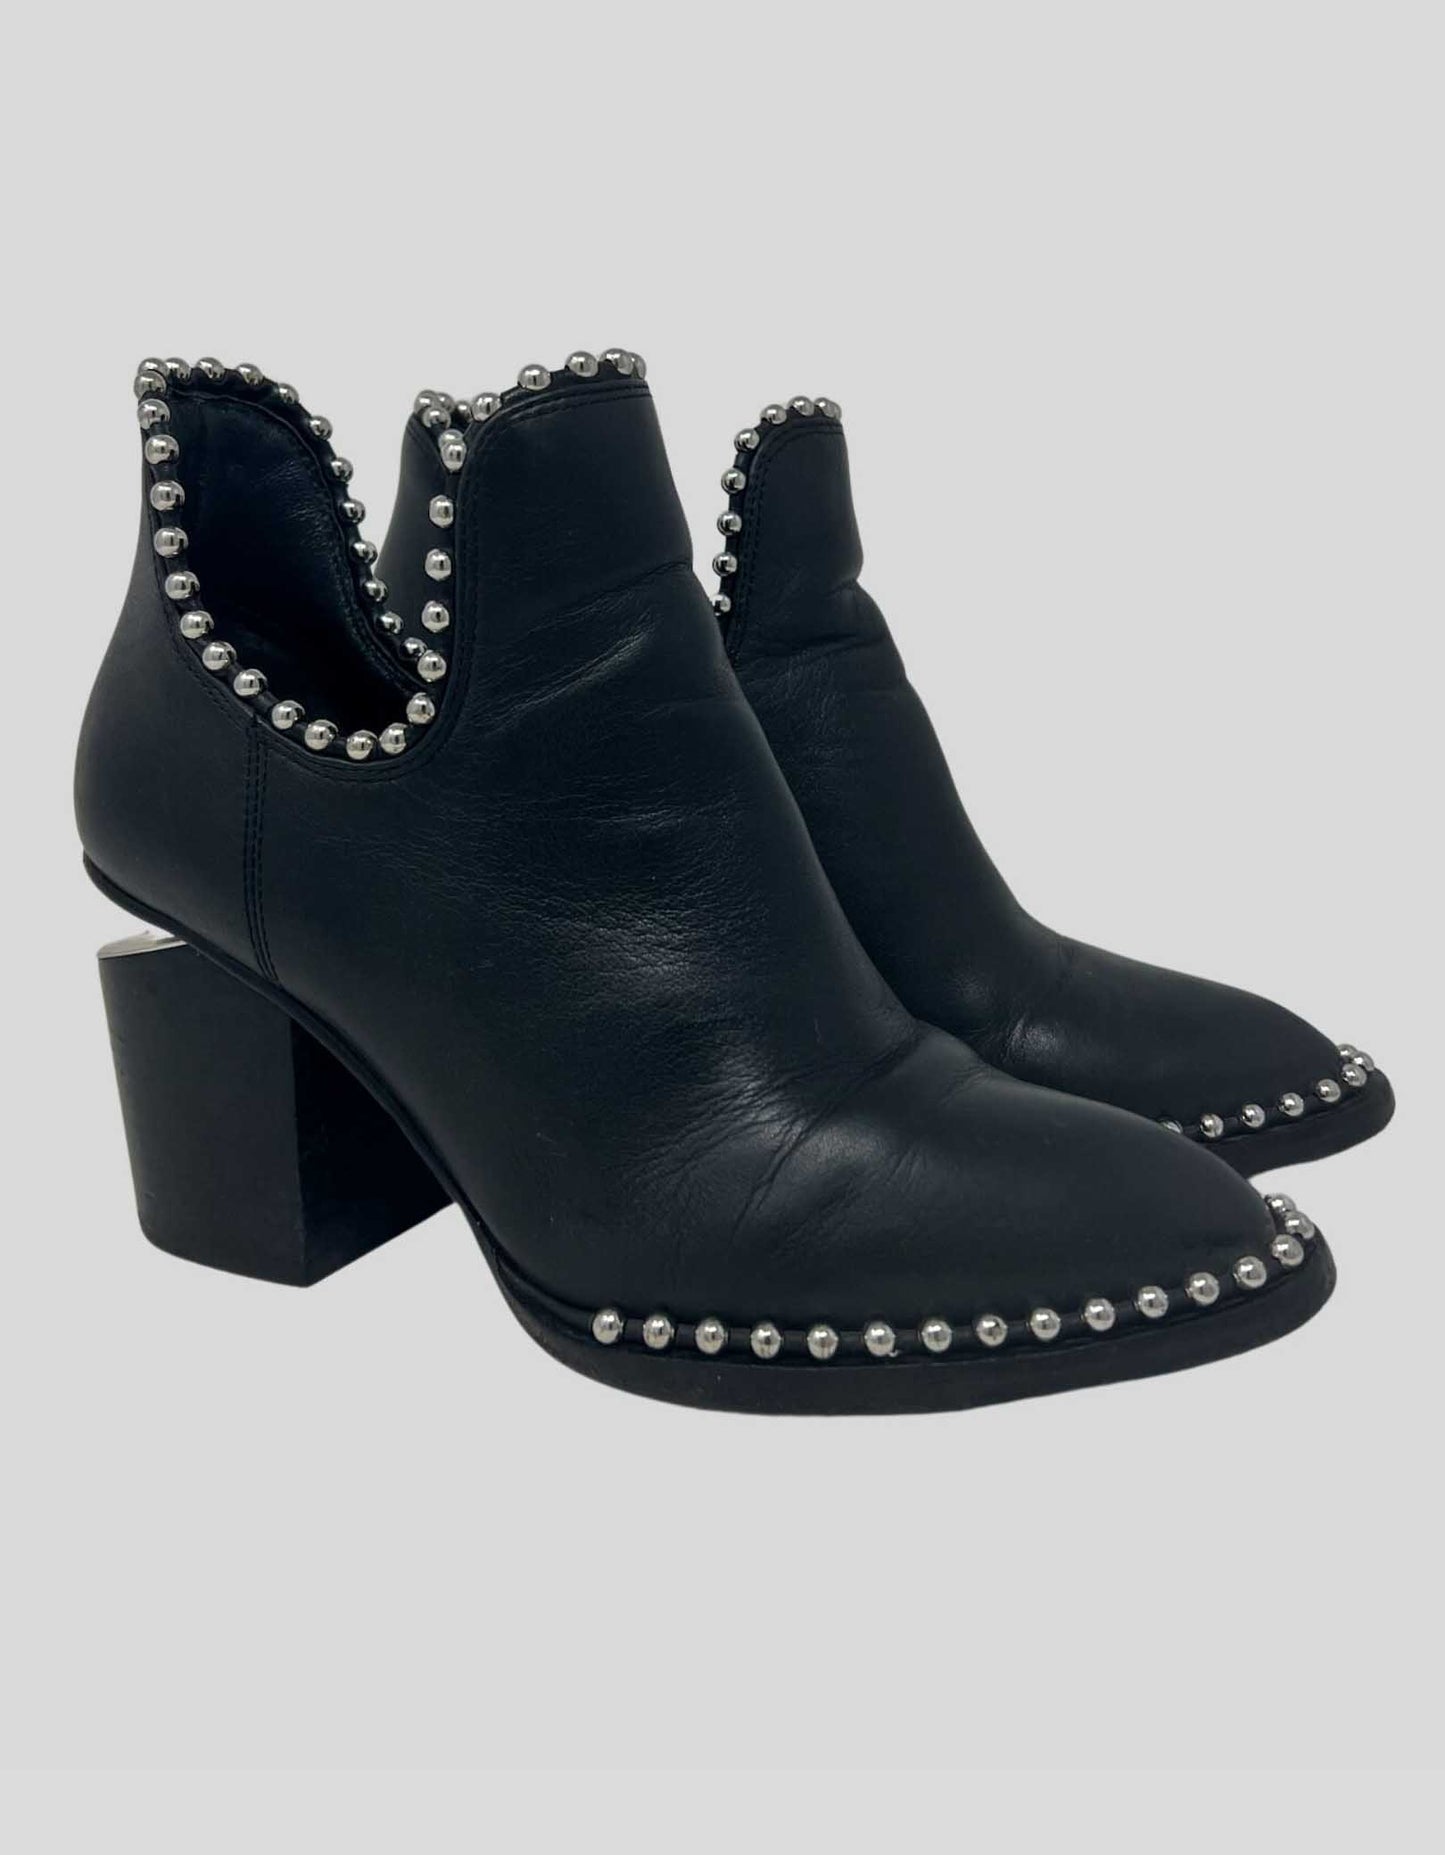 ALEXANDER WANG Leather Studded Accent Combat Boots - 37 IT | 7 US